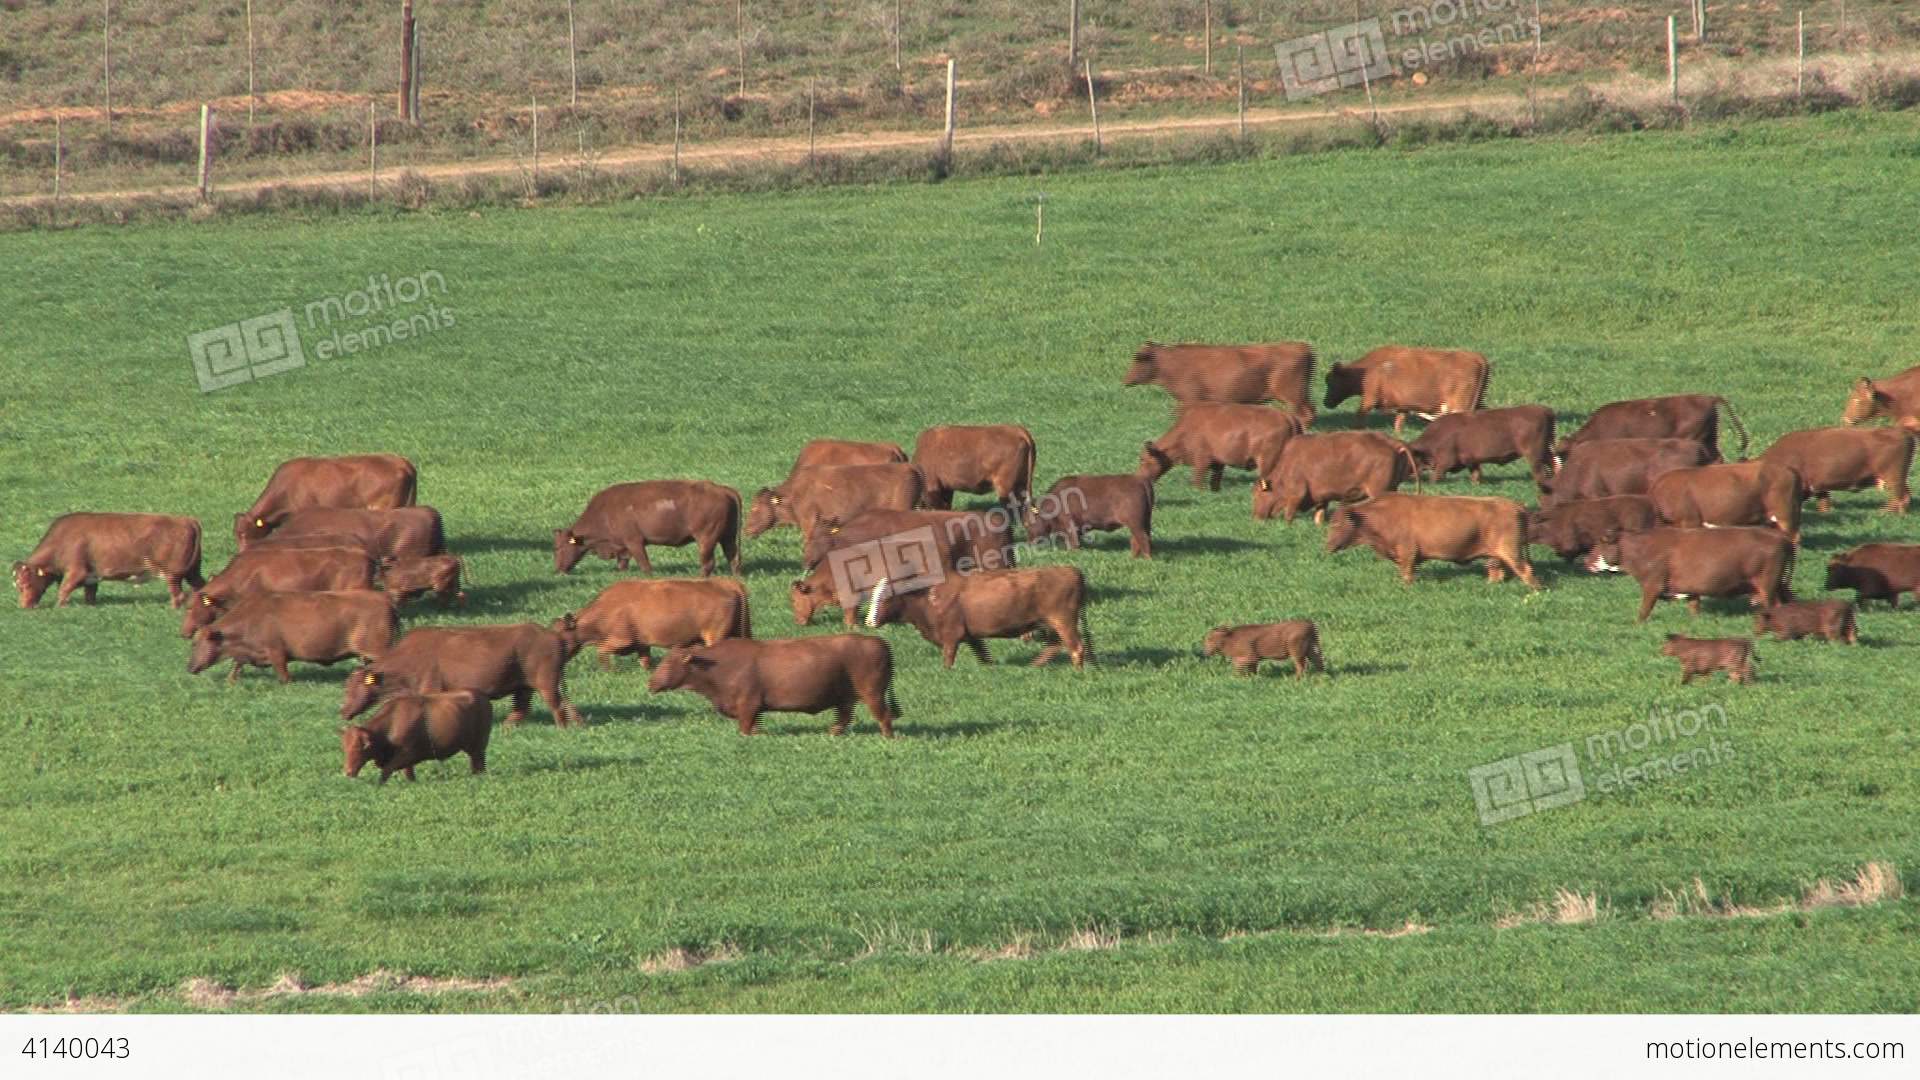 Big Group Of Cows, South Africa Stock video footage | 4140043